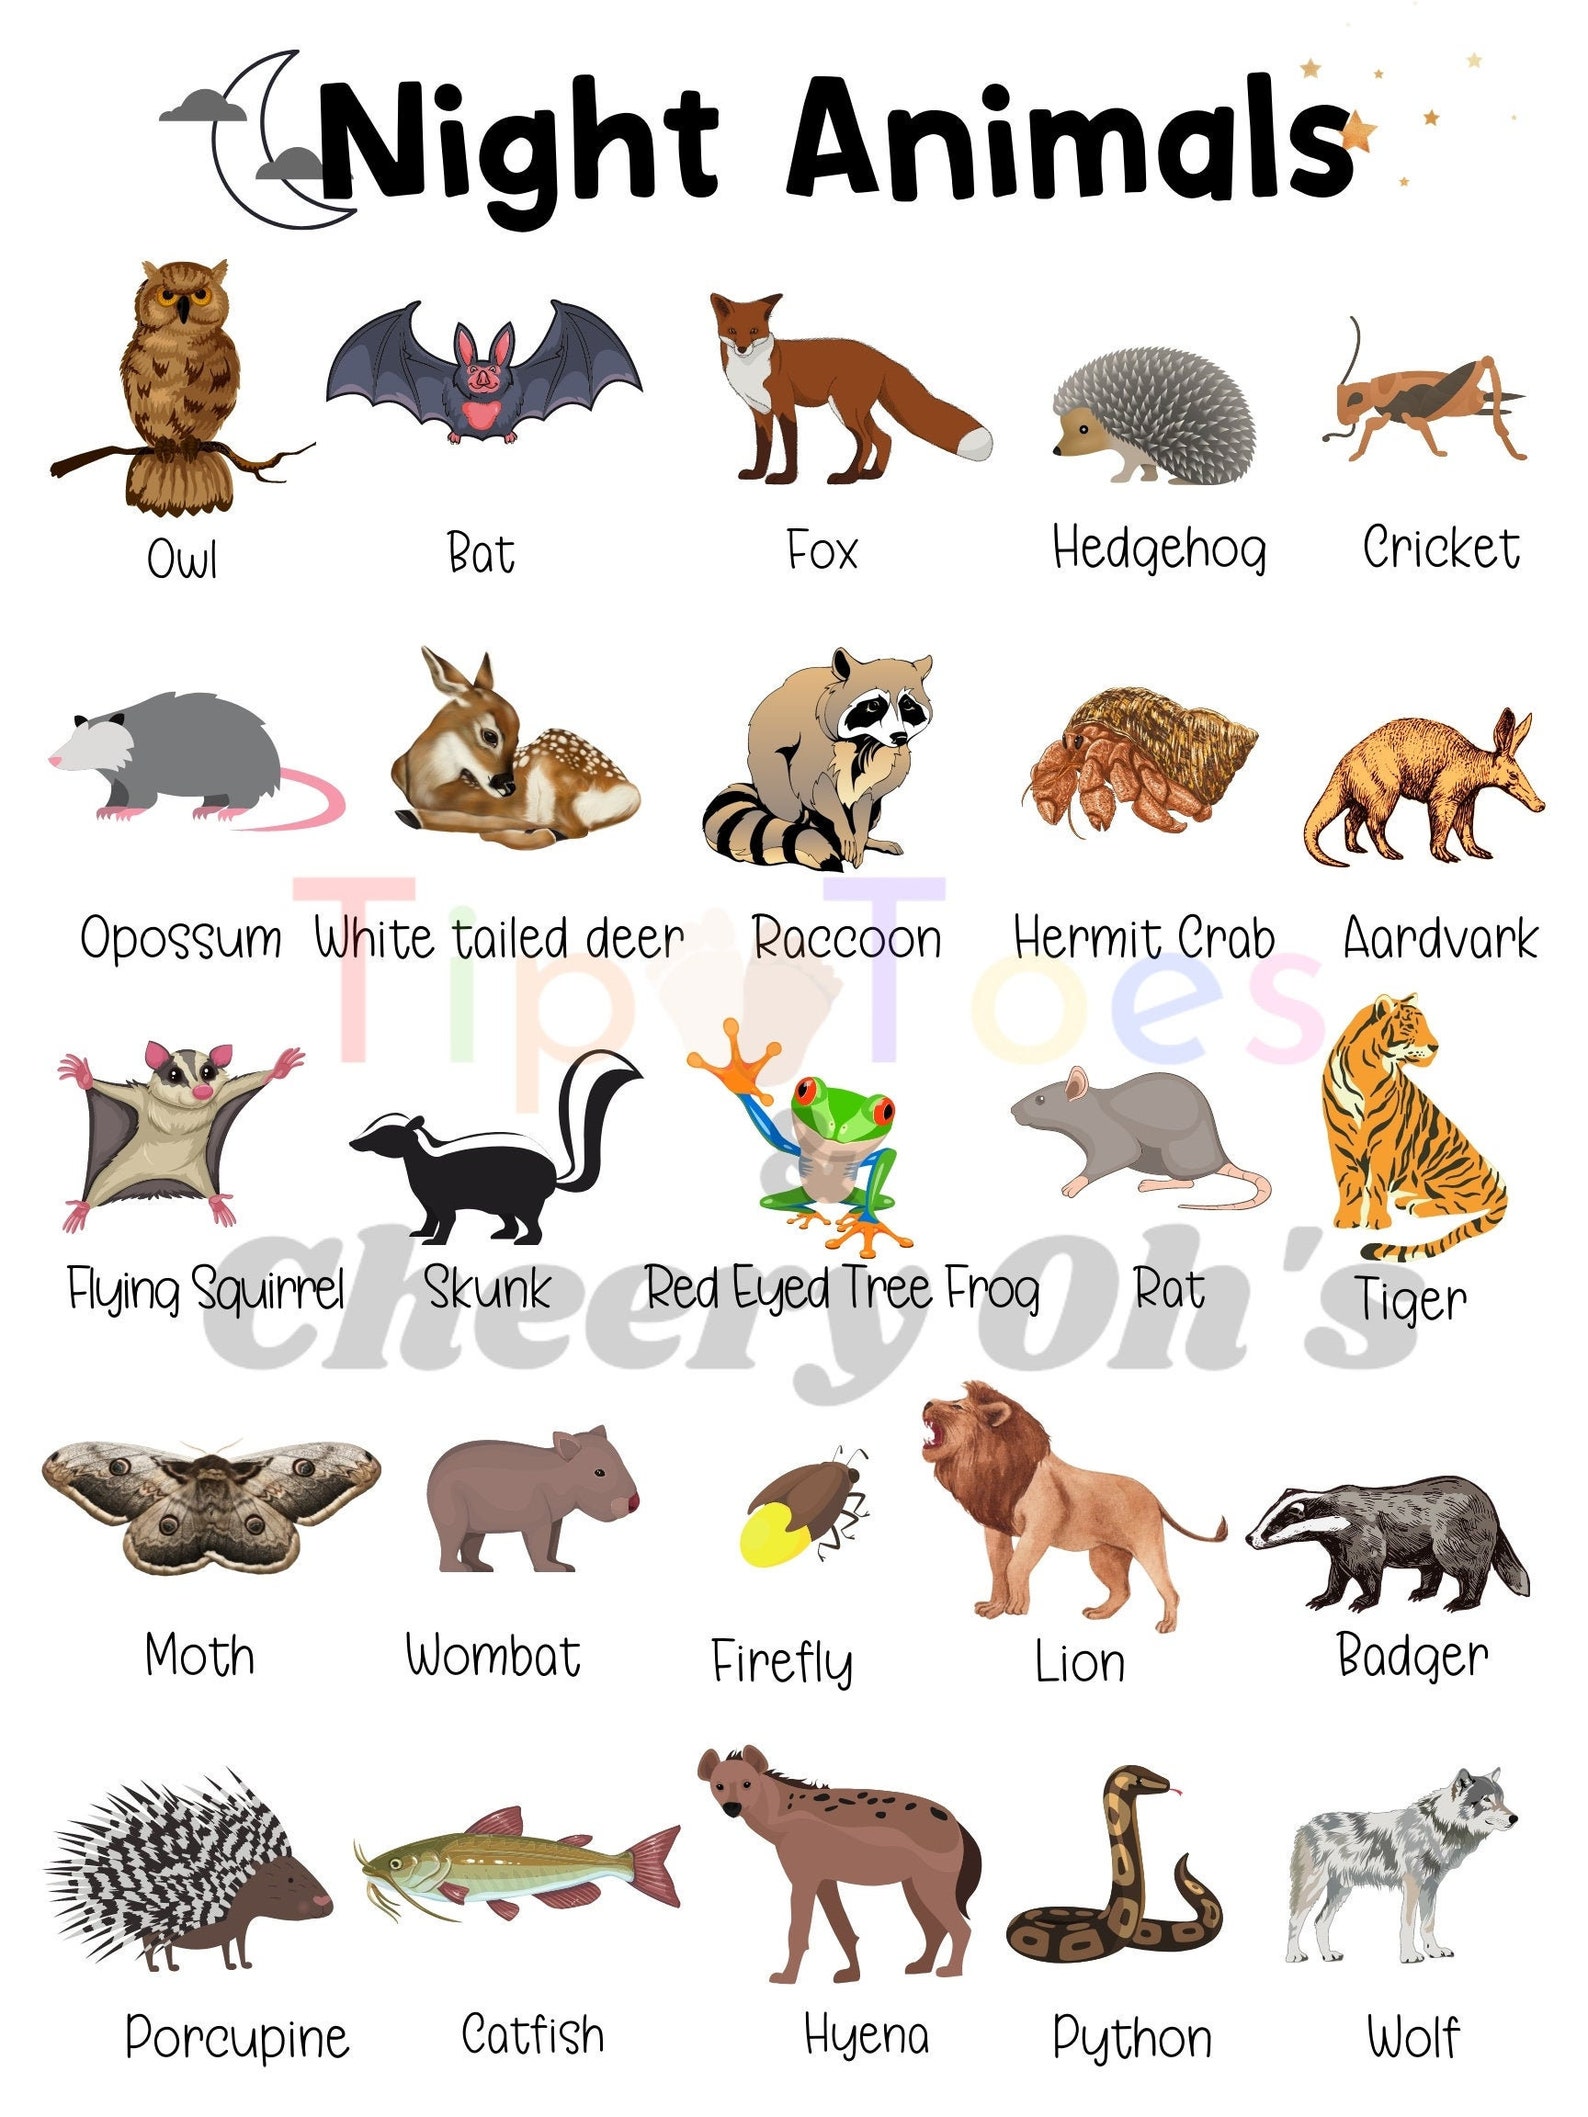 Nocturnal Animal Poster Night Animals Science Homeschool - Etsy